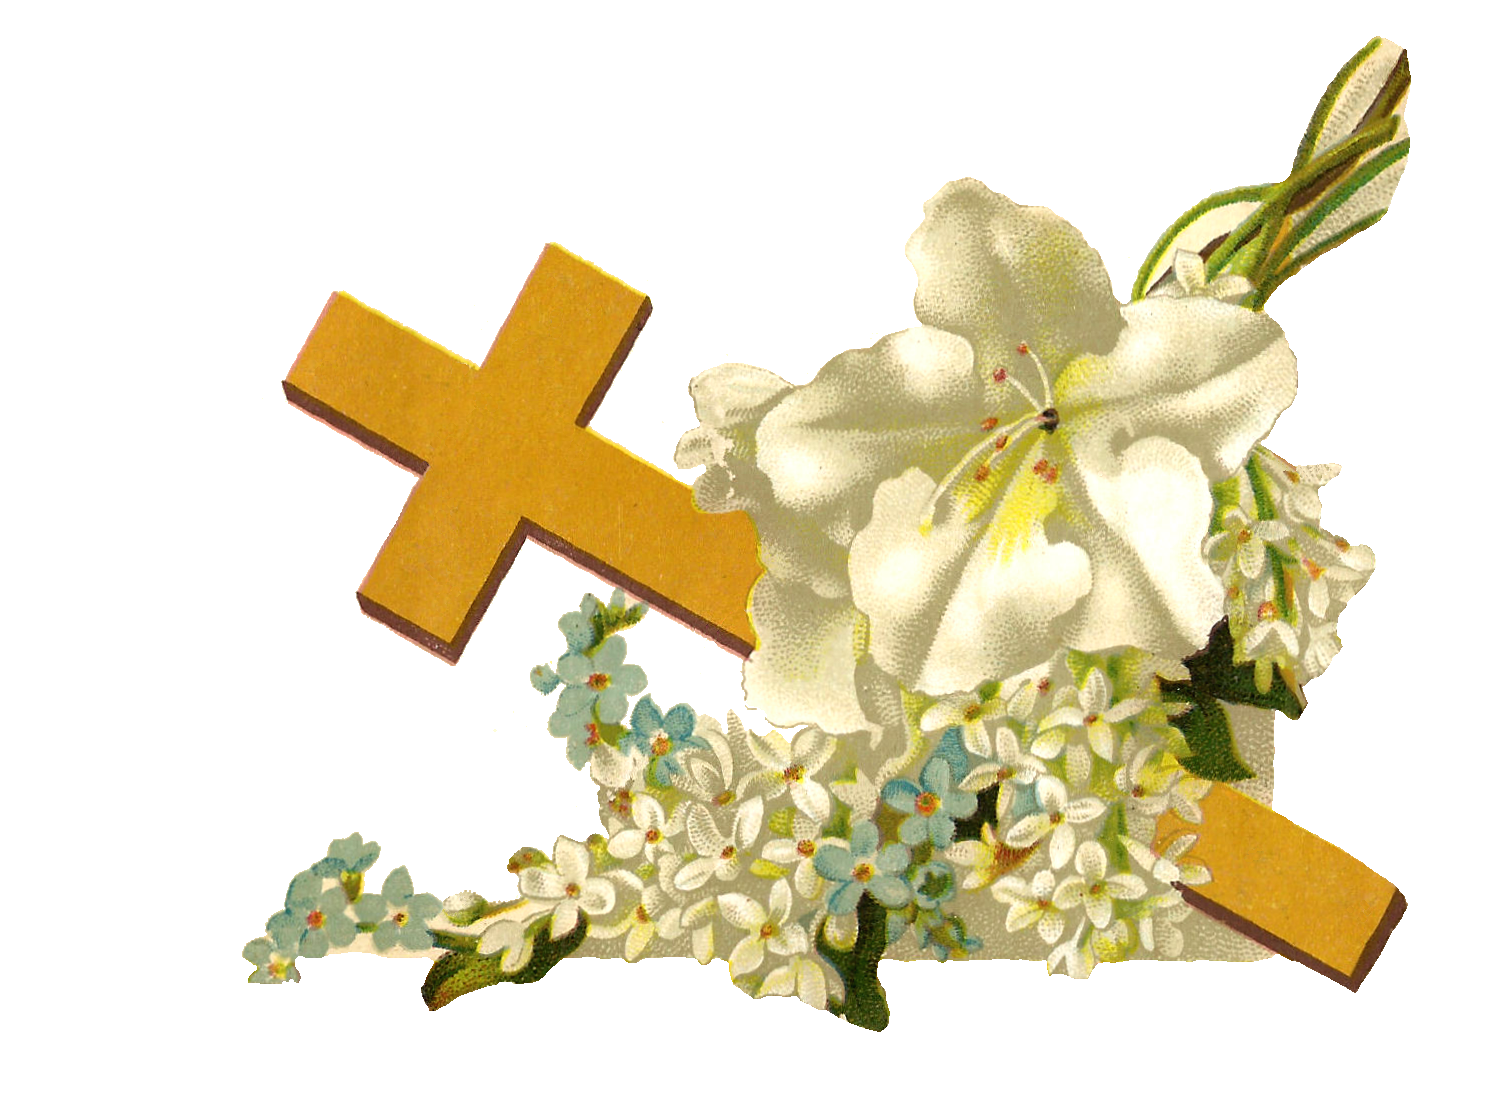 Antique images free religious clip art gold cross and white